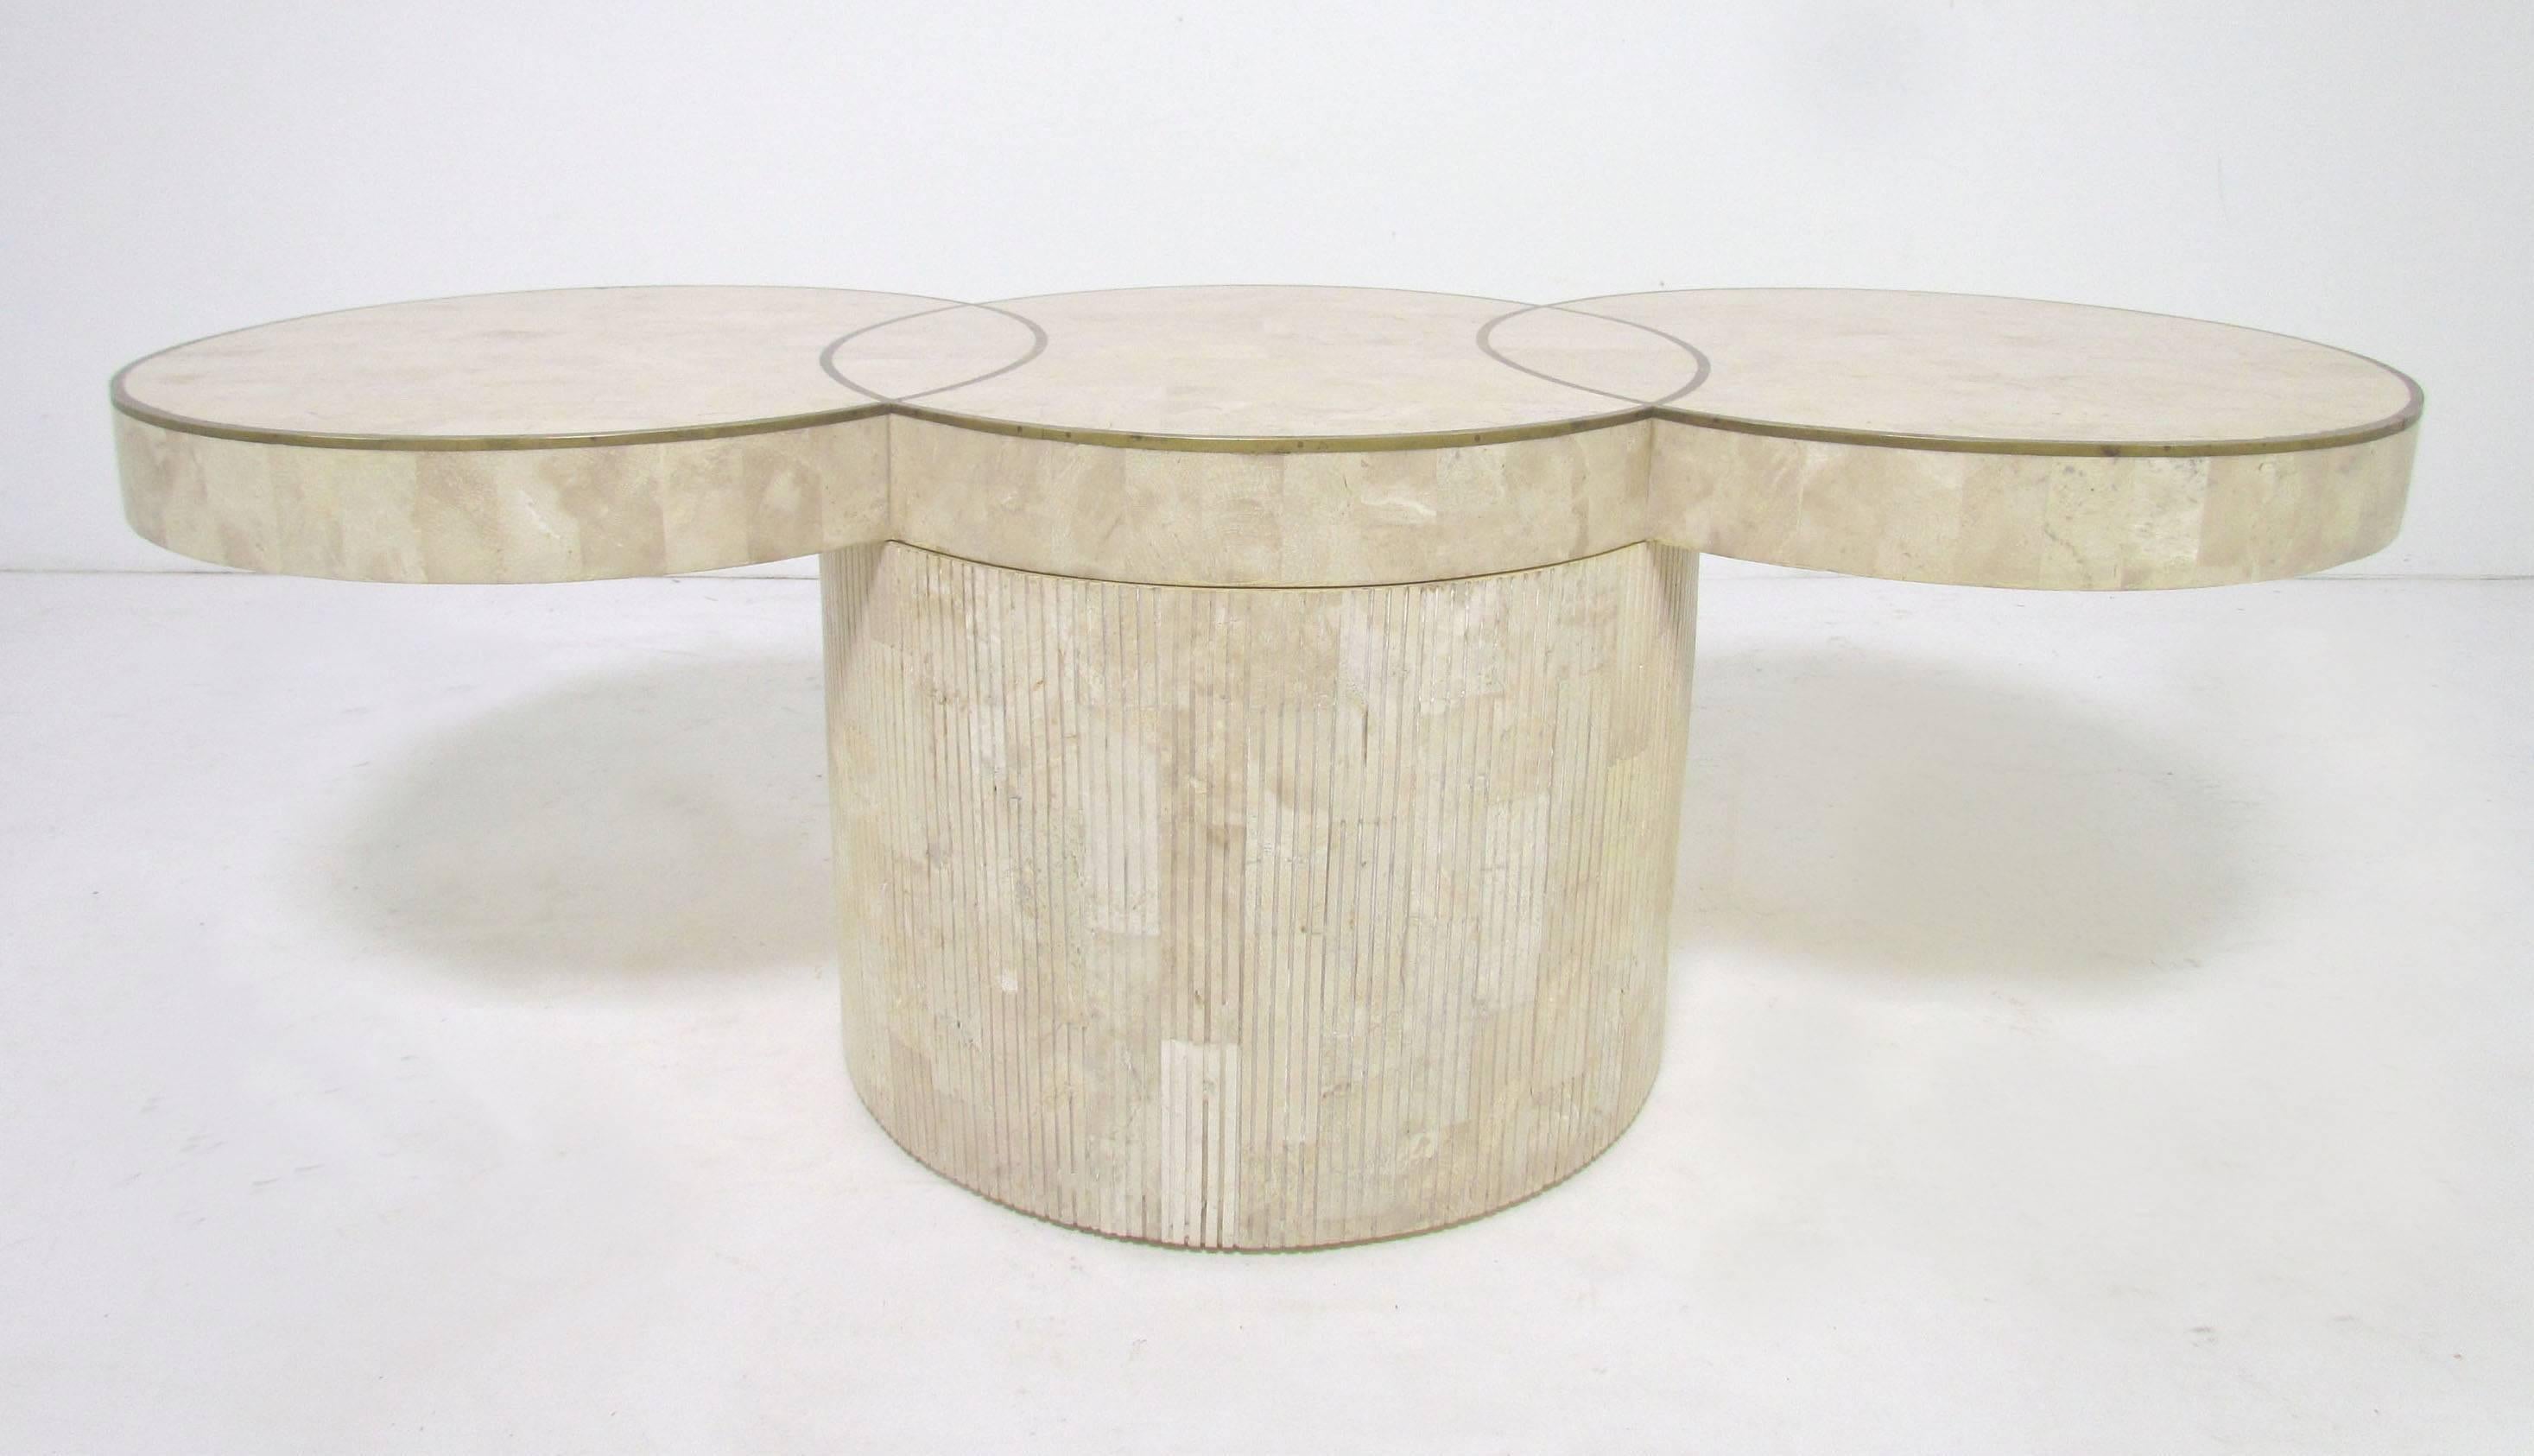 Cocktail table with tessellated fossil stone top of three conjoined disks inlaid with a brass trim border, and carved reeded fossil stone base. Unmarked, but bears all the design elements associated with Maitland Smith.